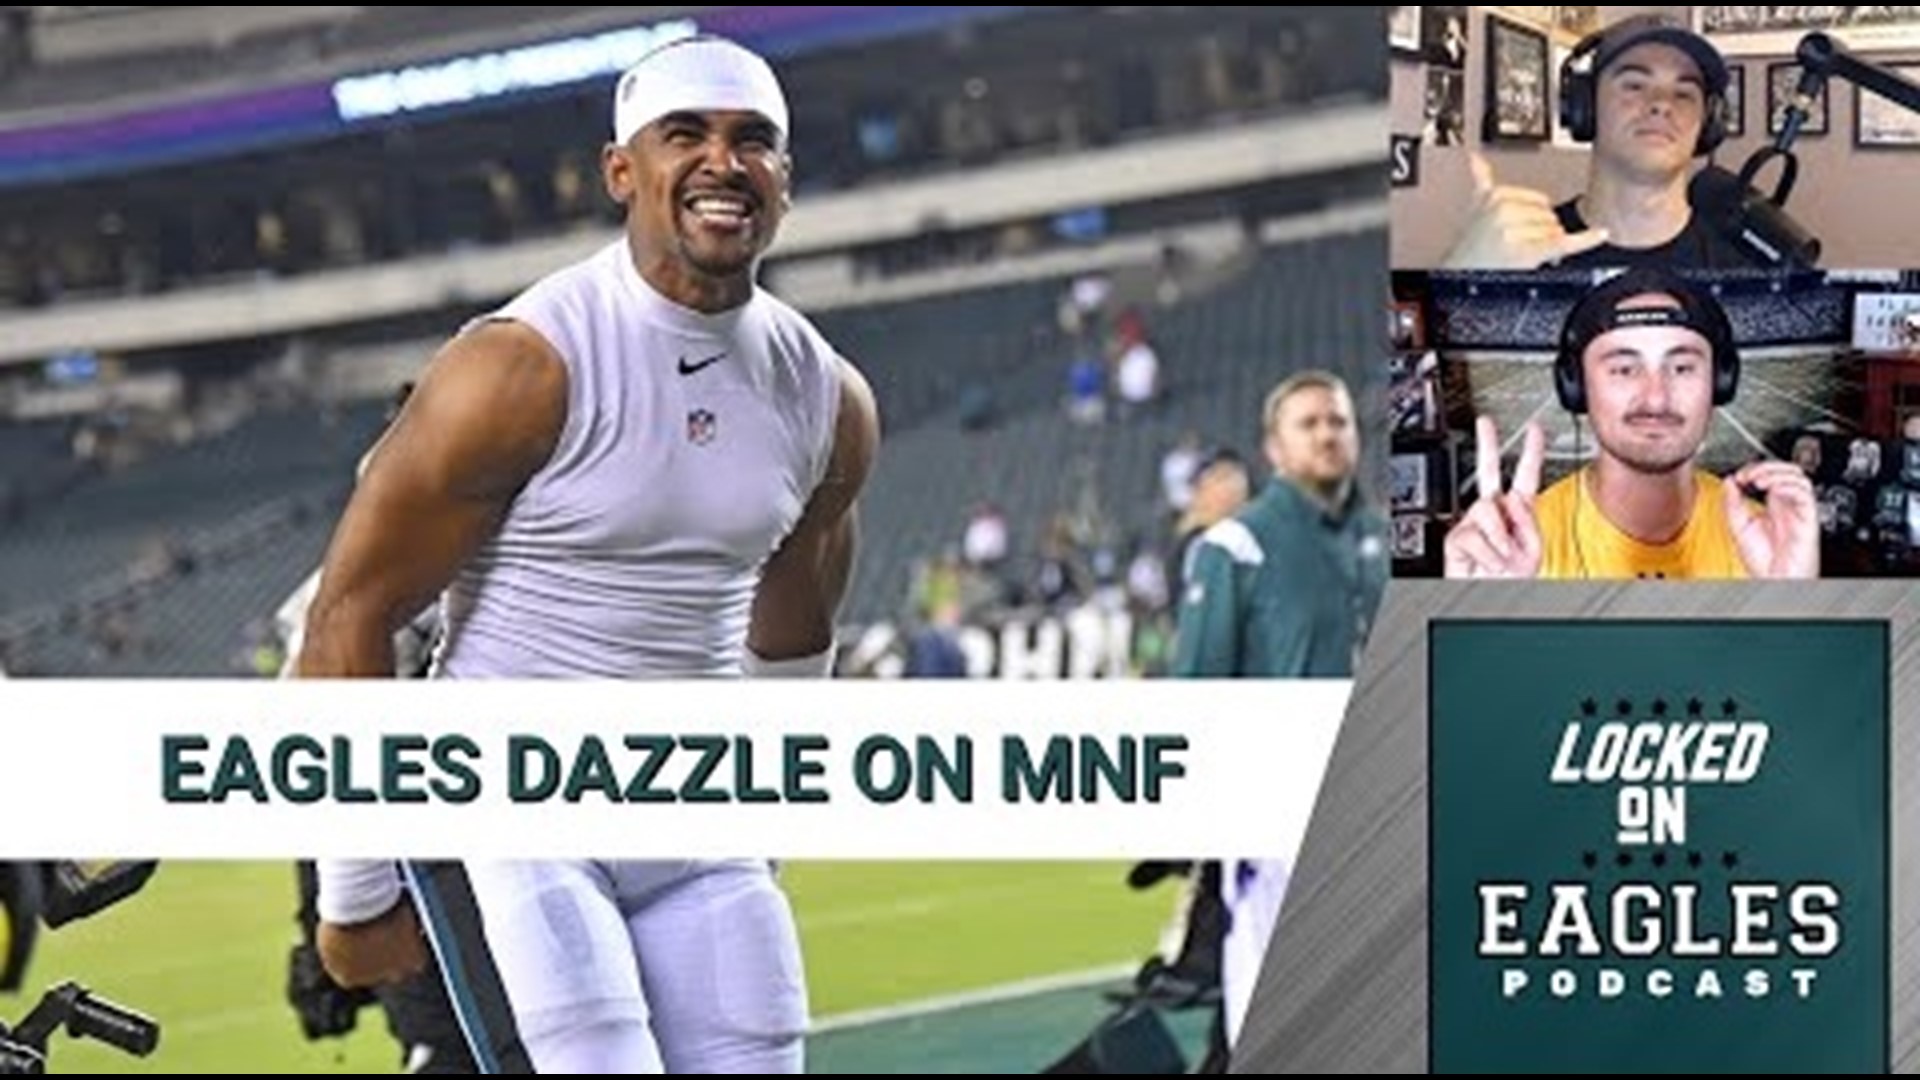 The Philadelphia Eagles move to 2-0 for the first time since 2016 after winning in dominating fashion against the Minnesota Vikings on Monday Night Football.